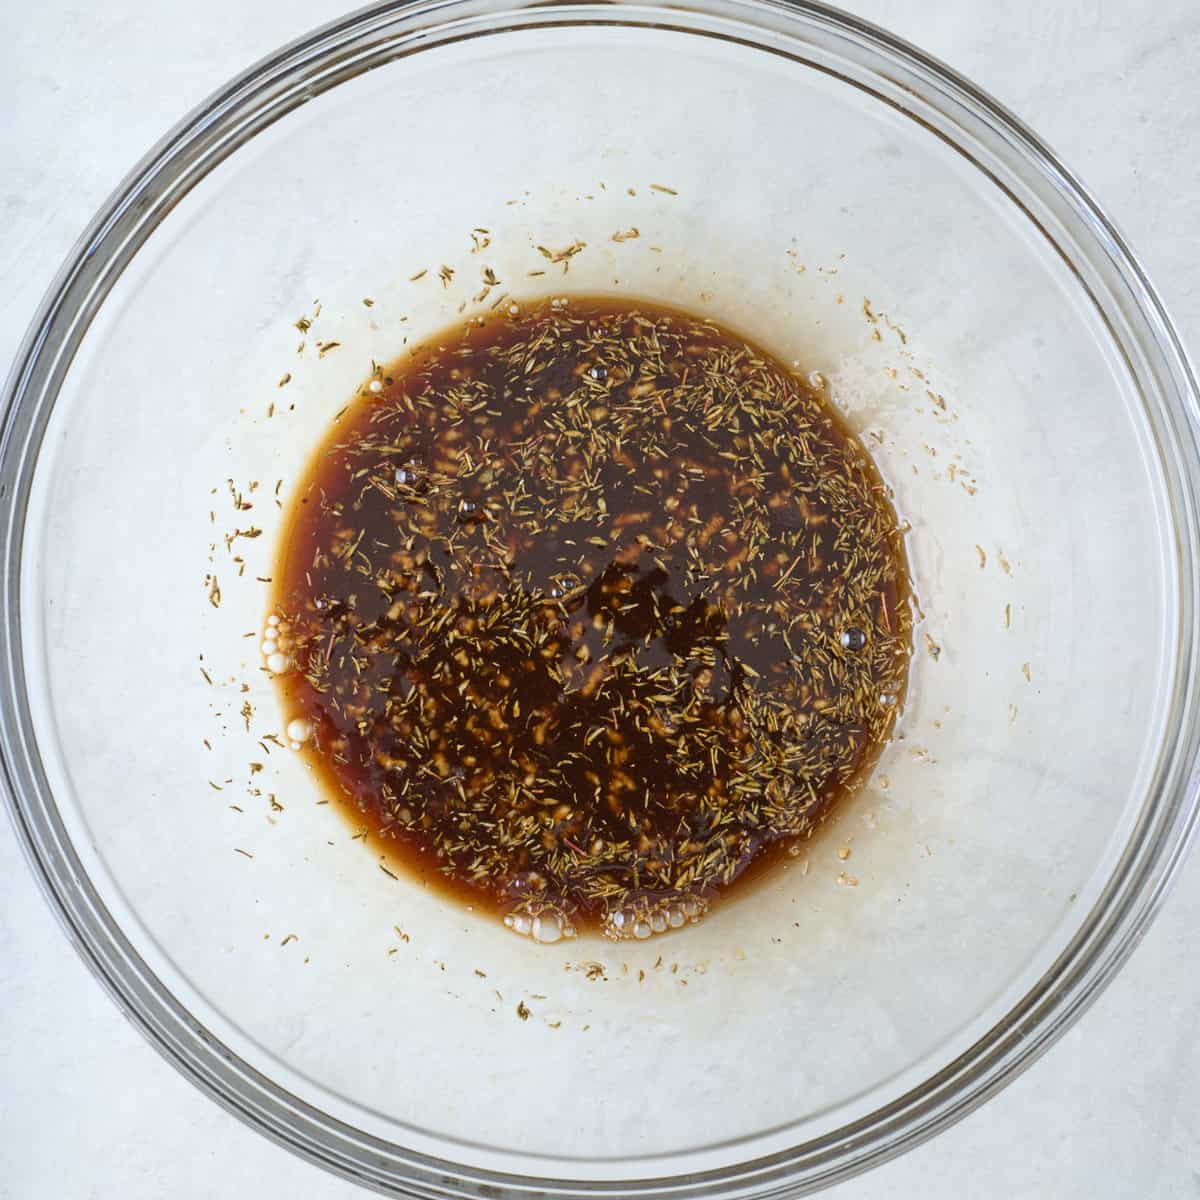 Marinade for steak in a bowl